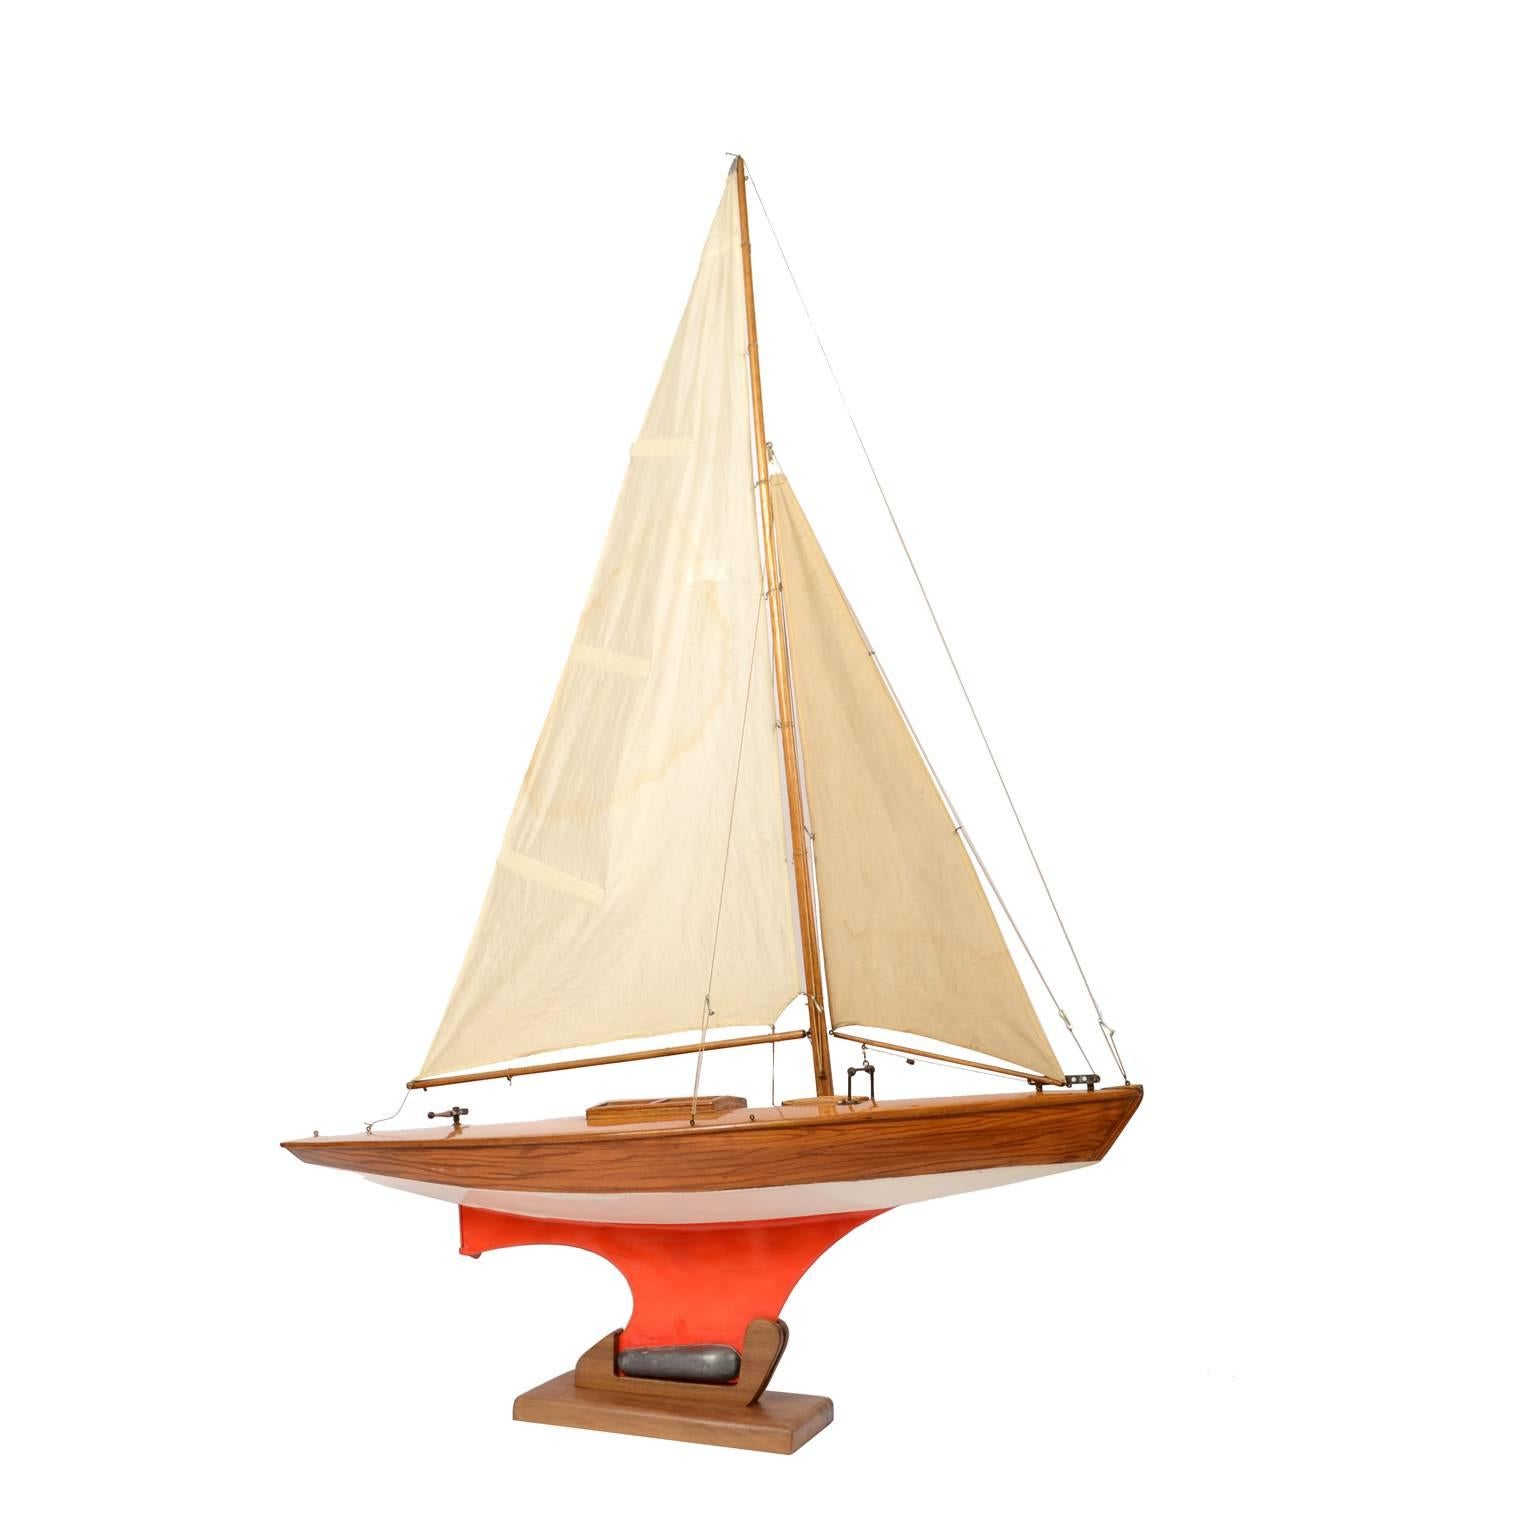 British Pond Model on Wooden Base, Red and White Hull Made in the 1950s